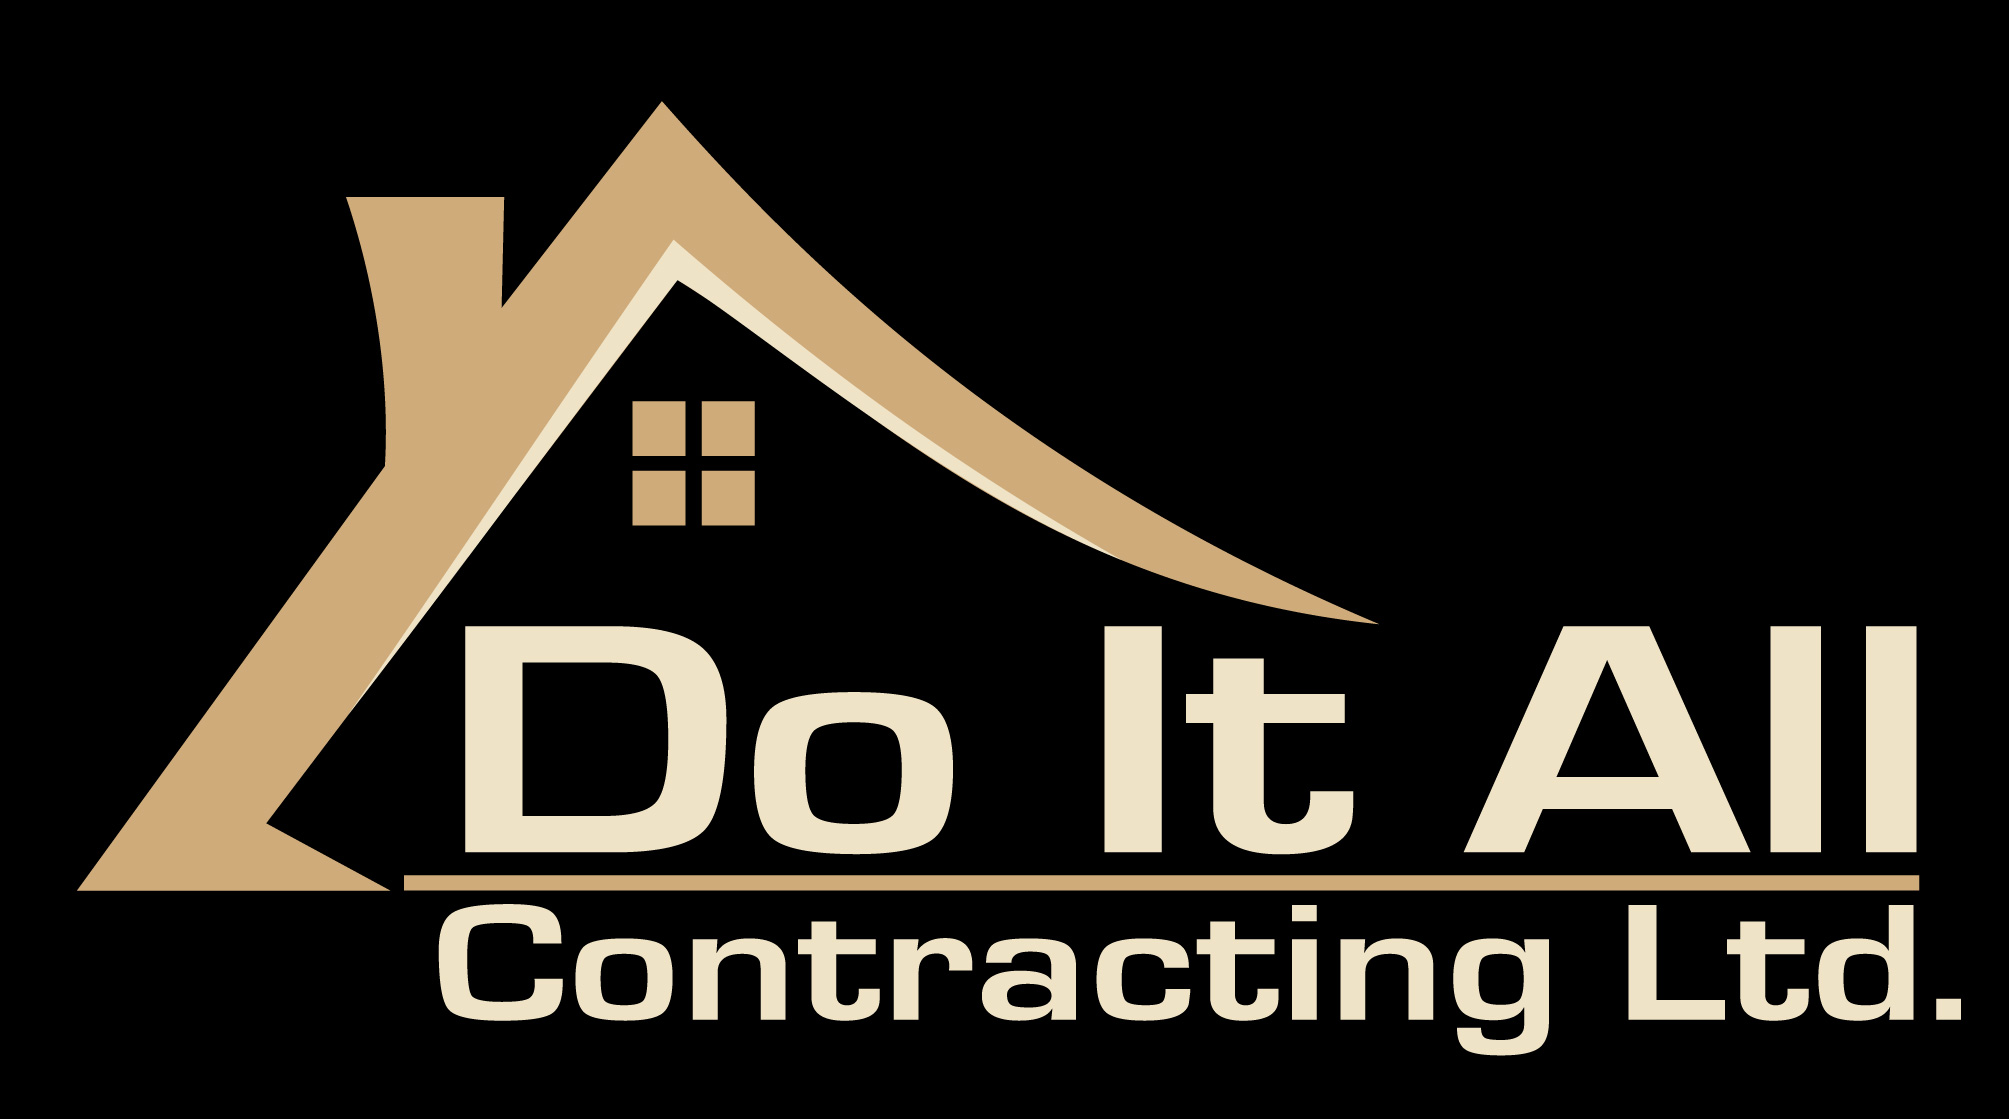 Do It All Contracting Ltd.'s logo